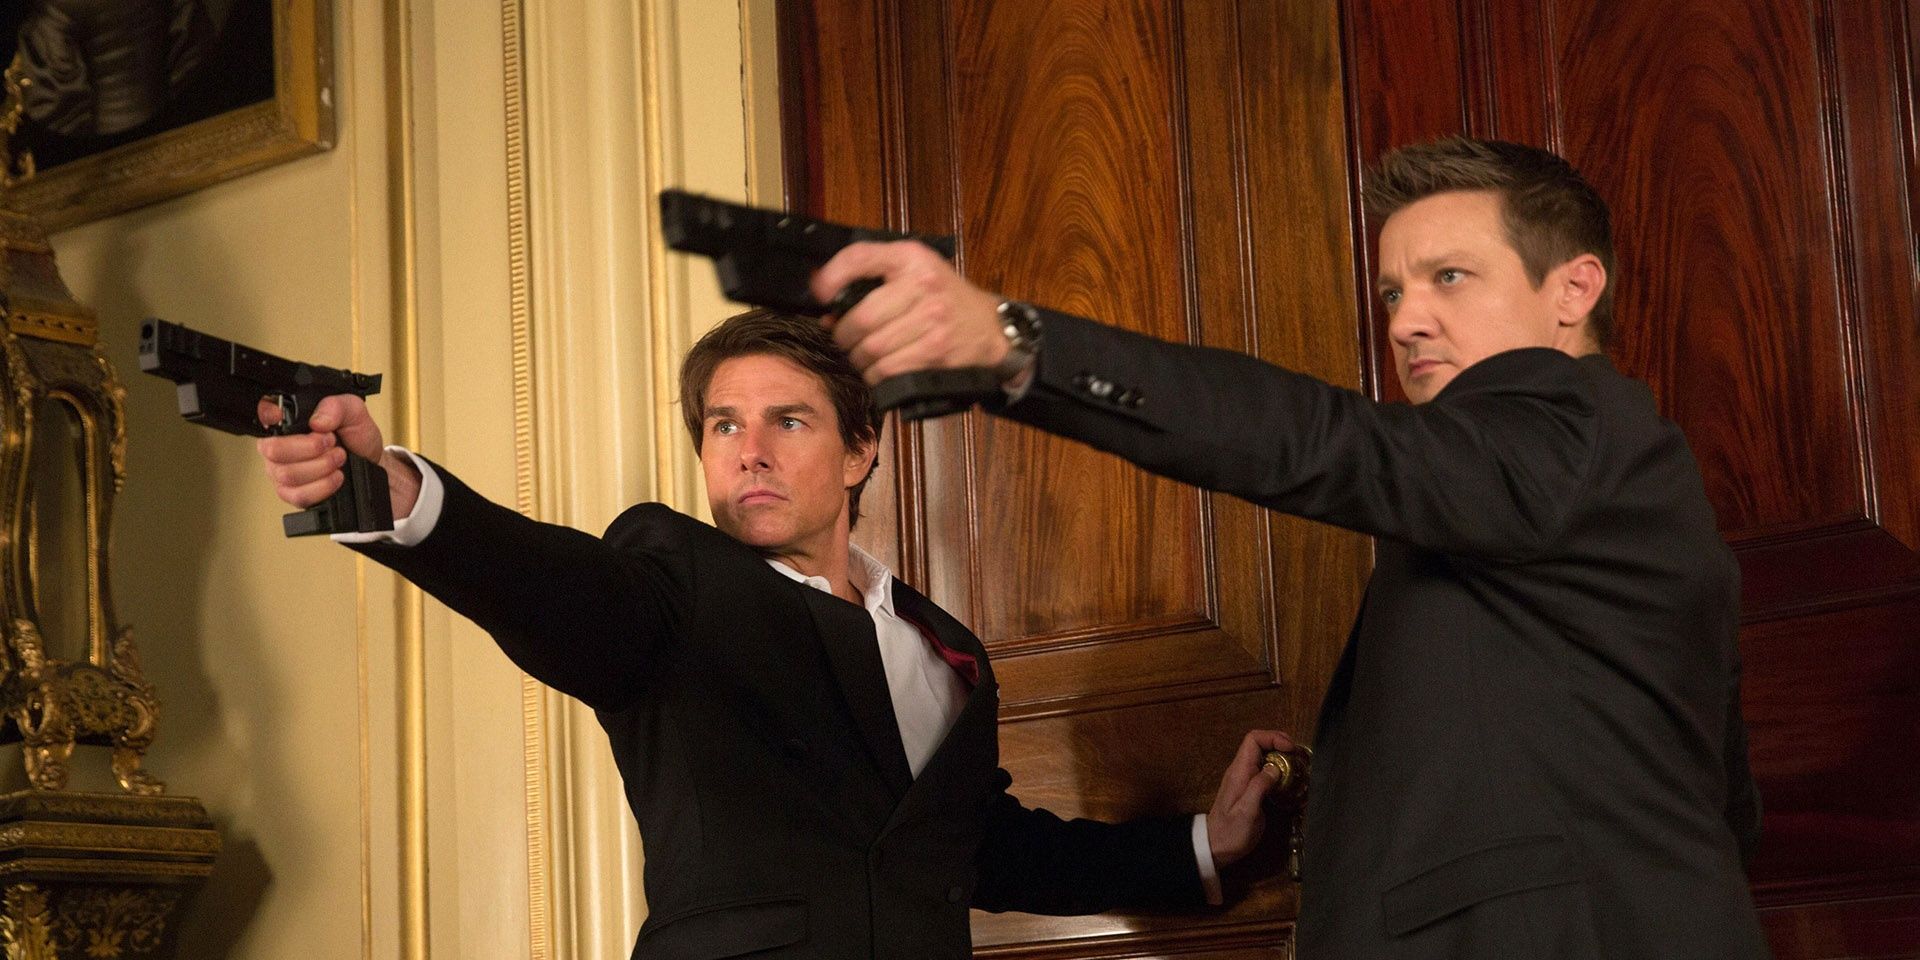 Jeremy Renner and Tom Cruise wielding guns